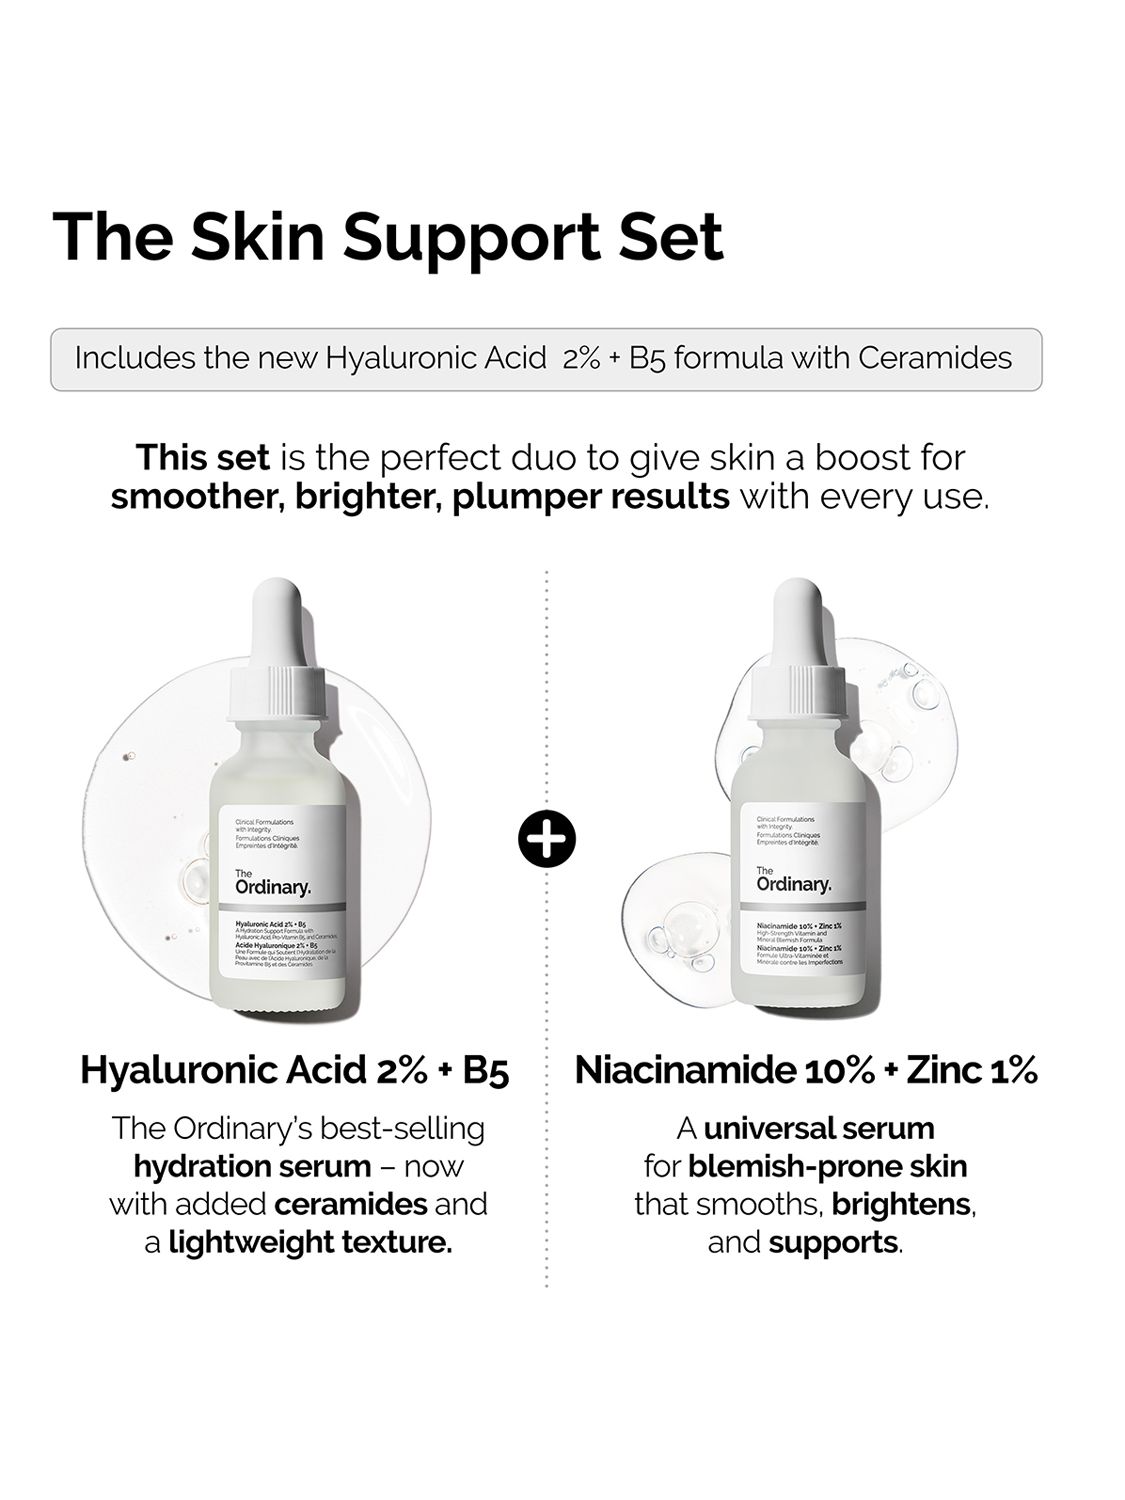 The Ordinary The Skin Support Set Skincare Gift Set 3